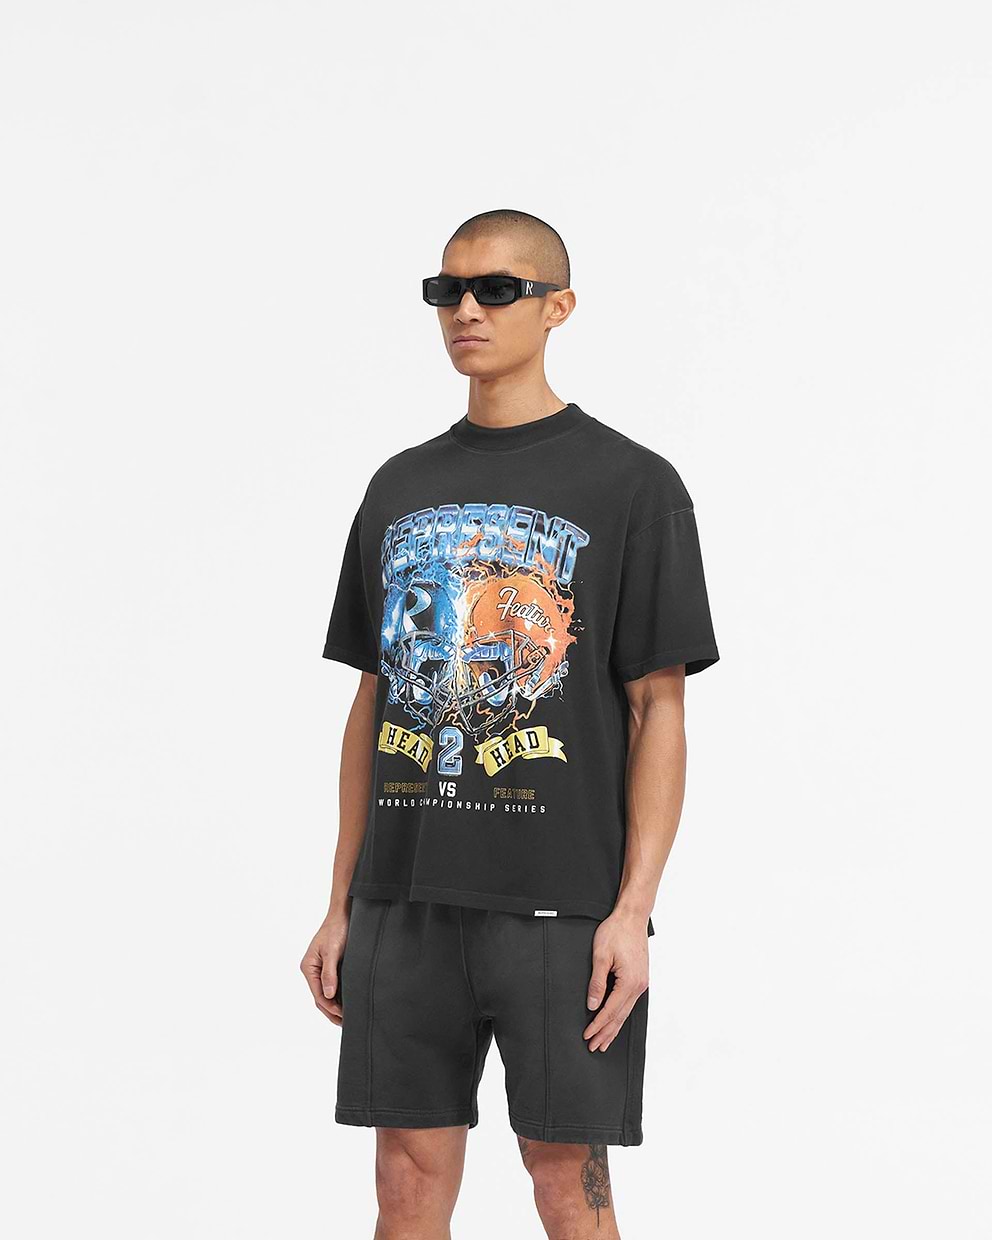 Represent X Feature Head 2 Head T-Shirt - Stained Black